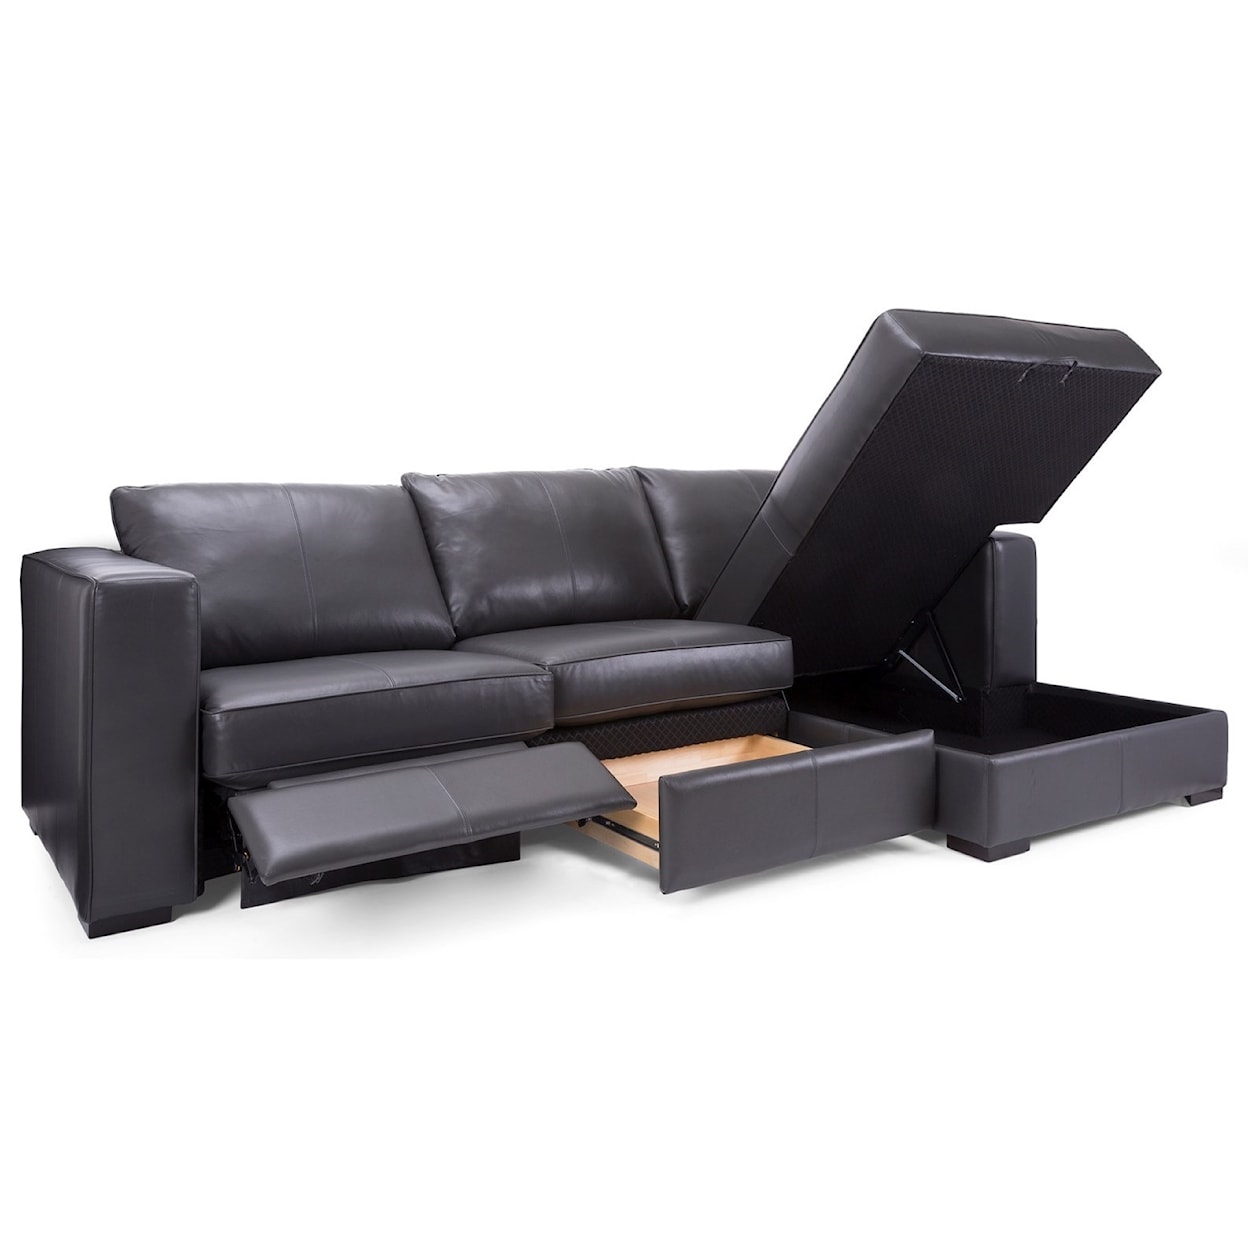 Decor-Rest 2900 Reclining Sofa with Chaise